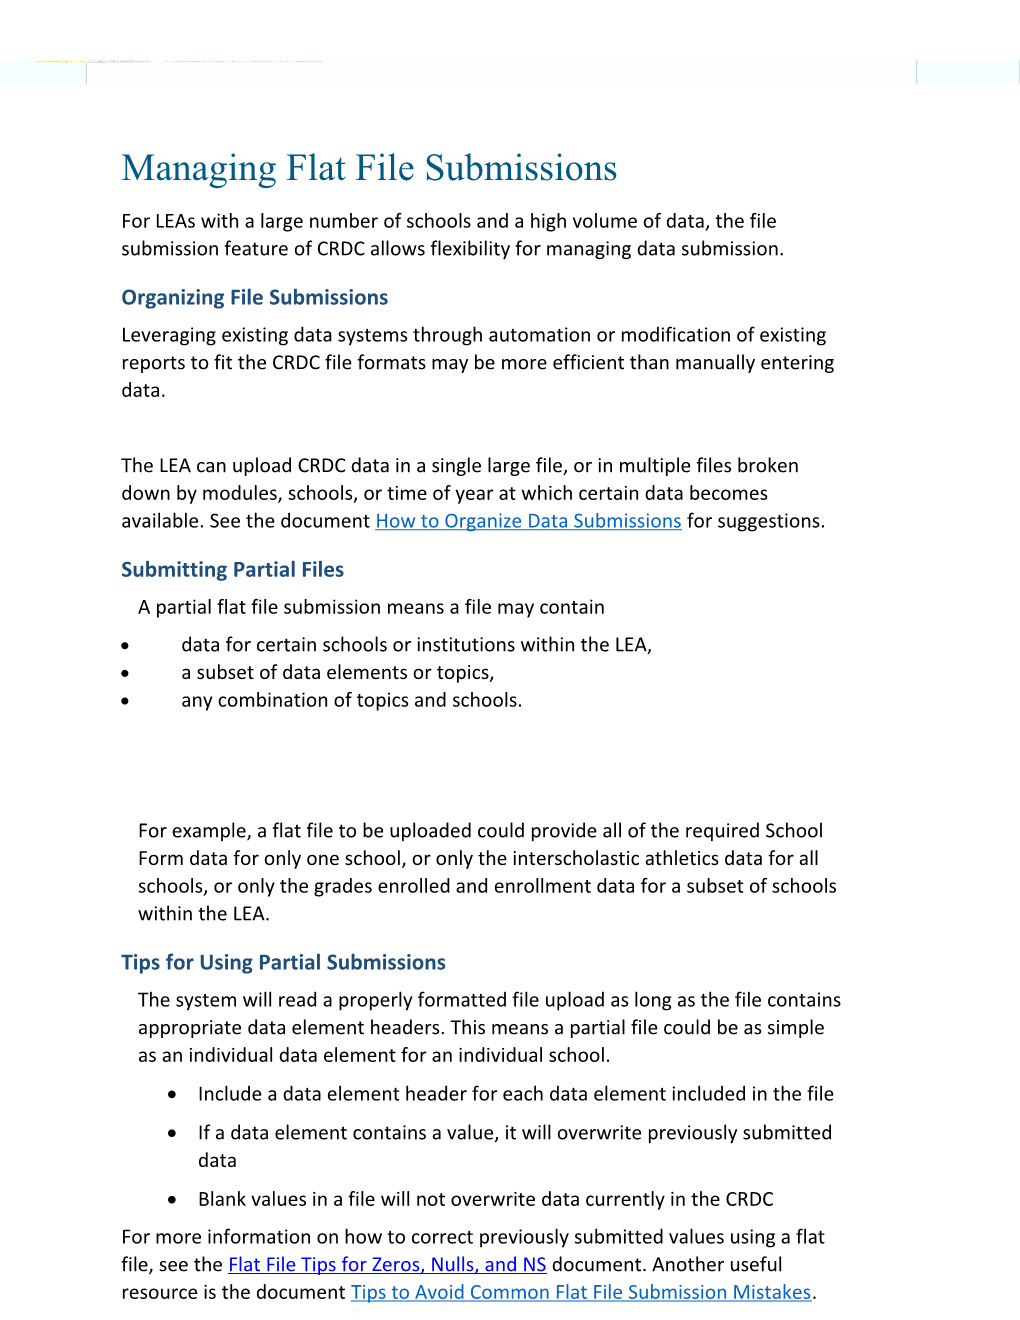 Organizing File Submissions